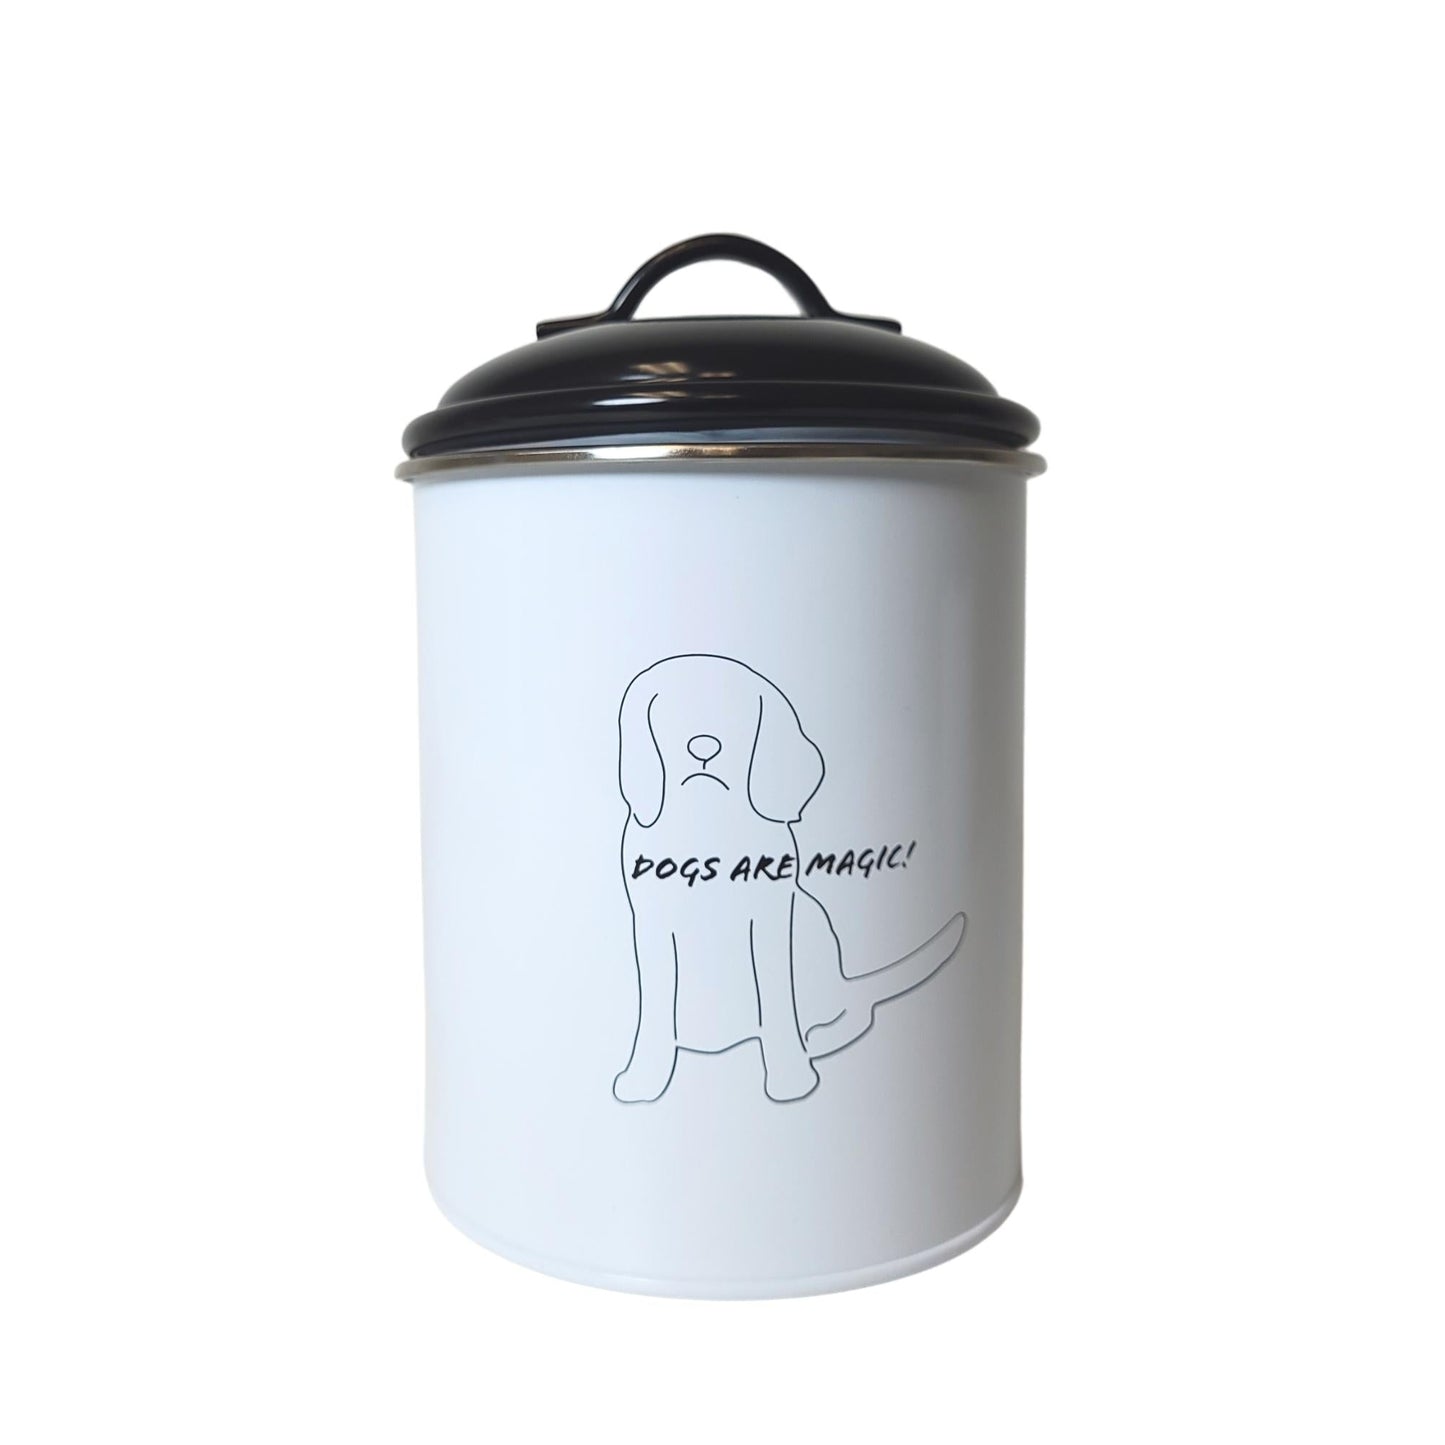 Black & White Pet Food & Treat Storage Canisters (Set of 3) by American Pet Supplies